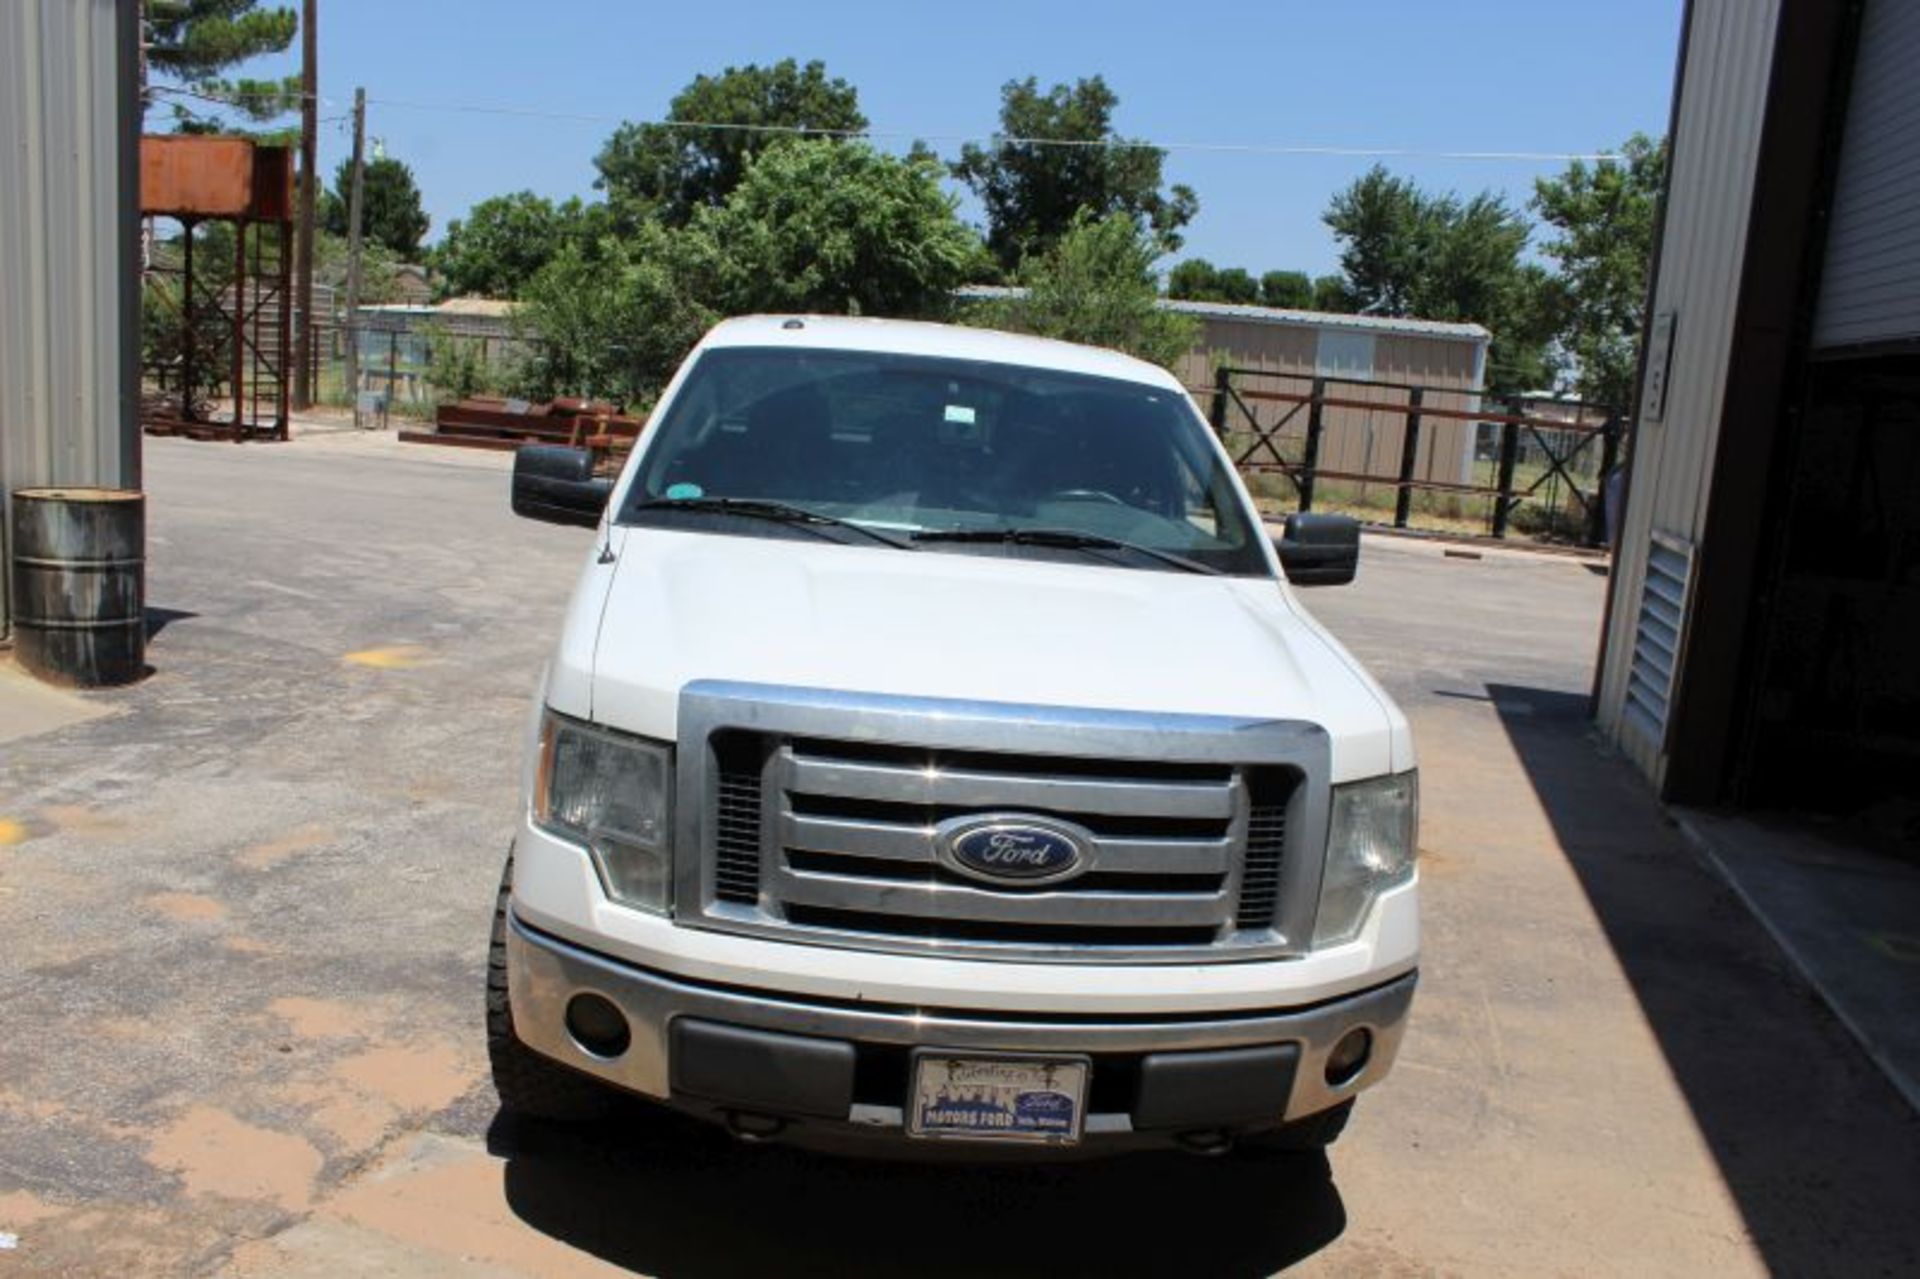 2010 FORD F-150 4 X 4 PICK UP TRUCK, OKLAHOMA LICENSE PLATE V42-567 MILES 248,509.8 - Image 3 of 7